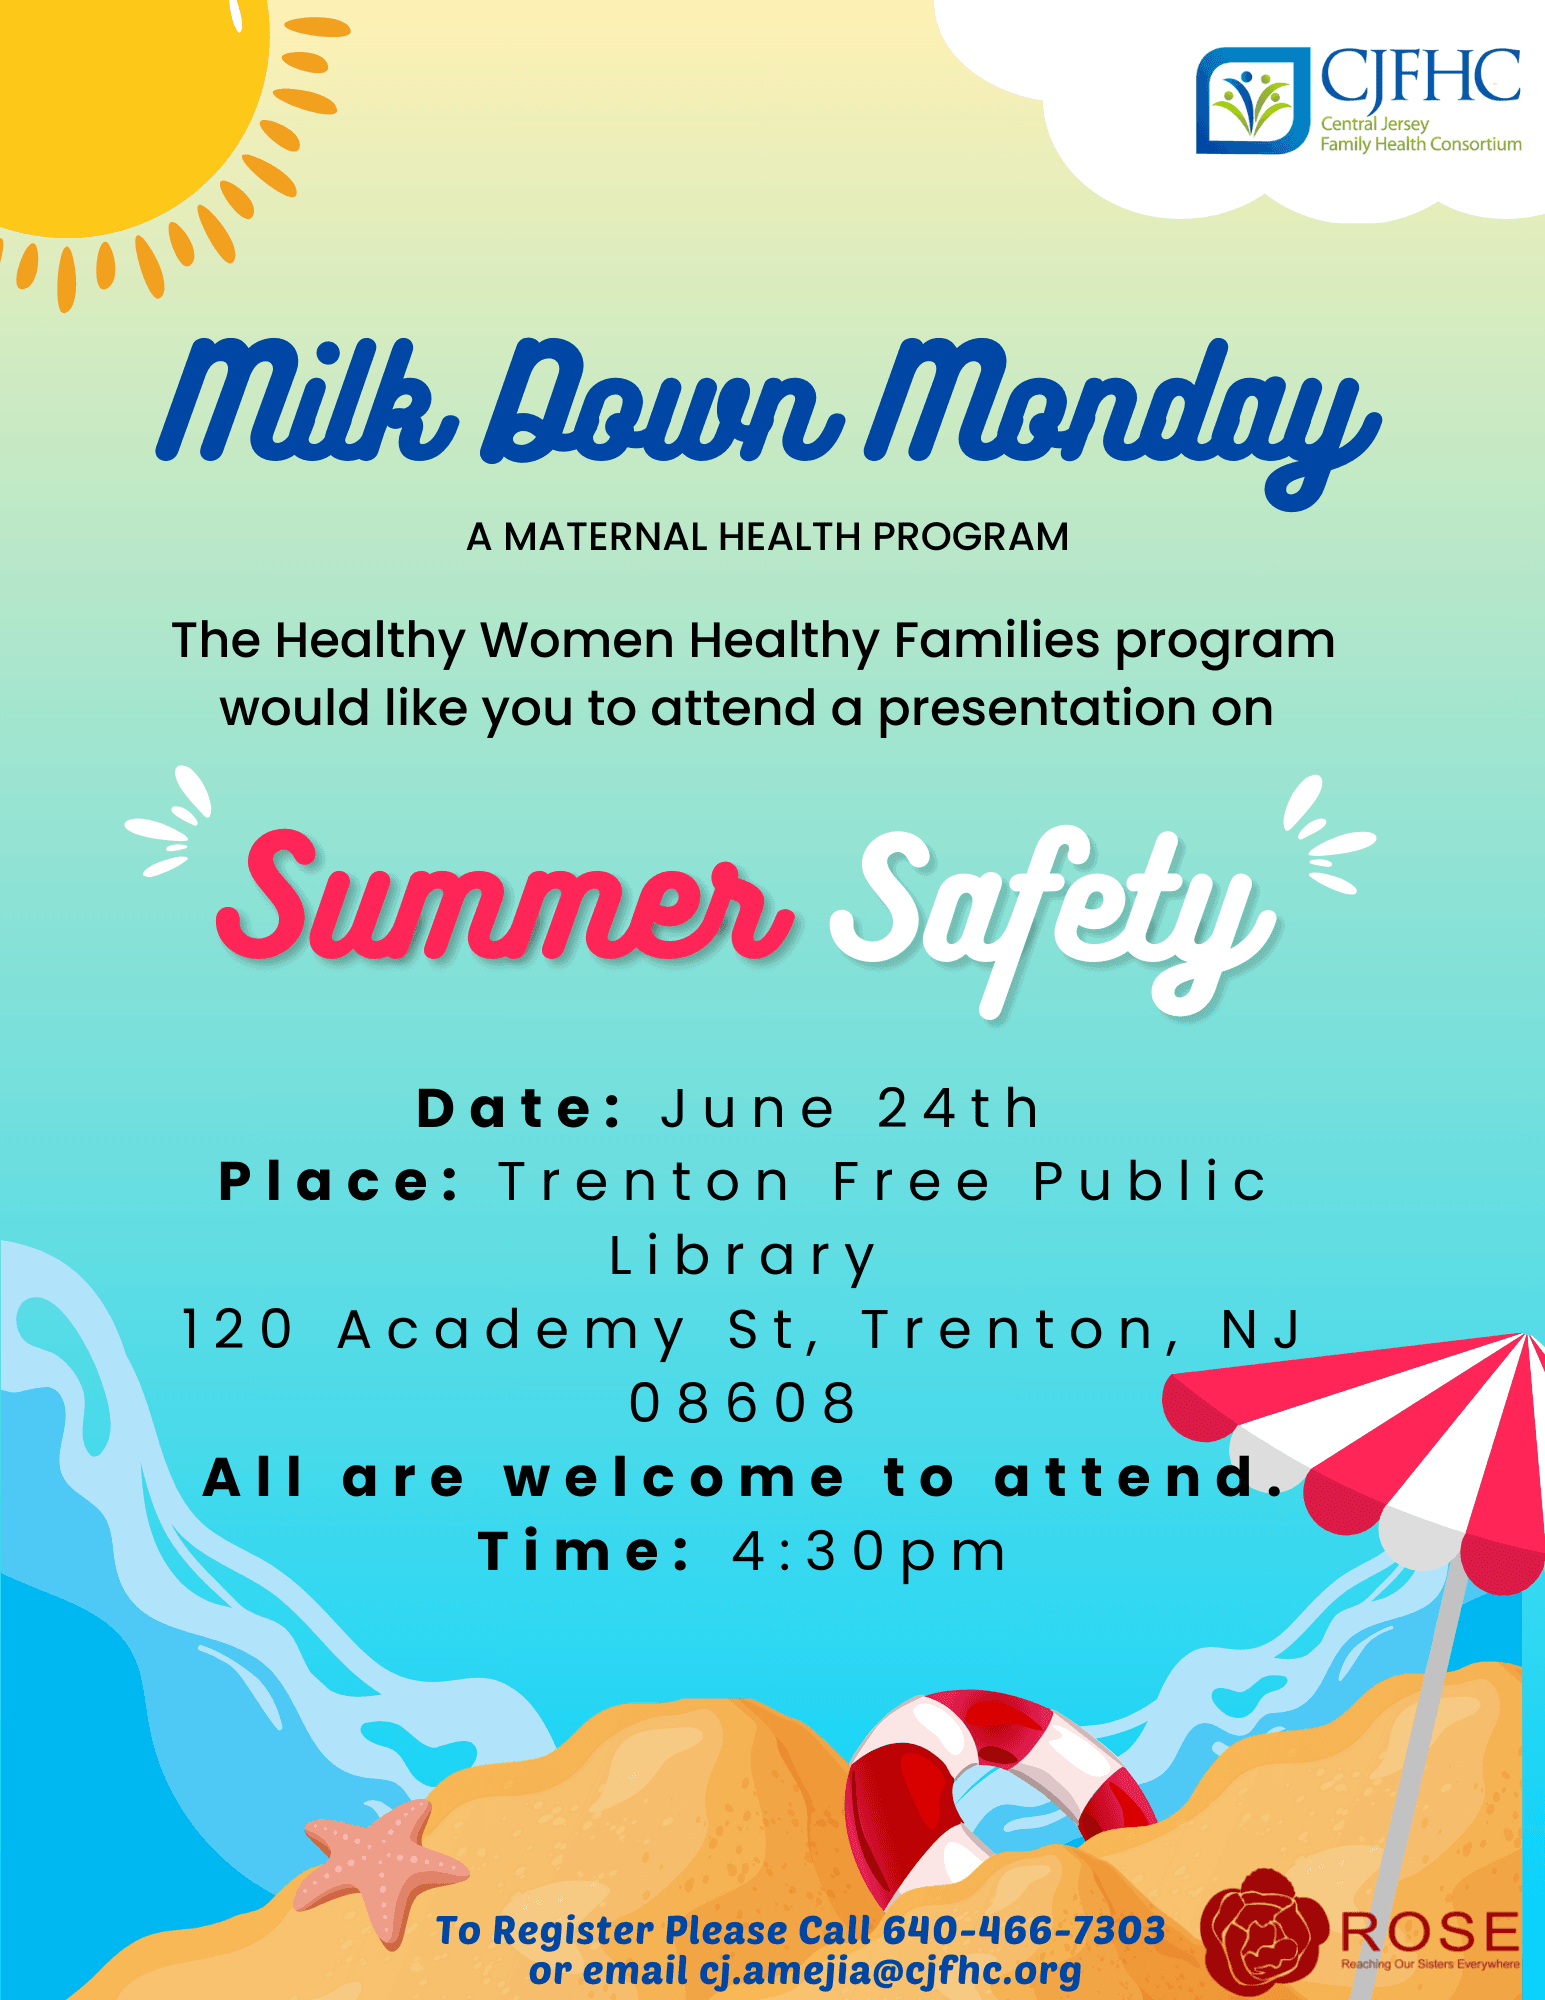 Join CJFHC Healthy Women, Healthy Families for Milk Down Monday Summer Safety in Trenton!